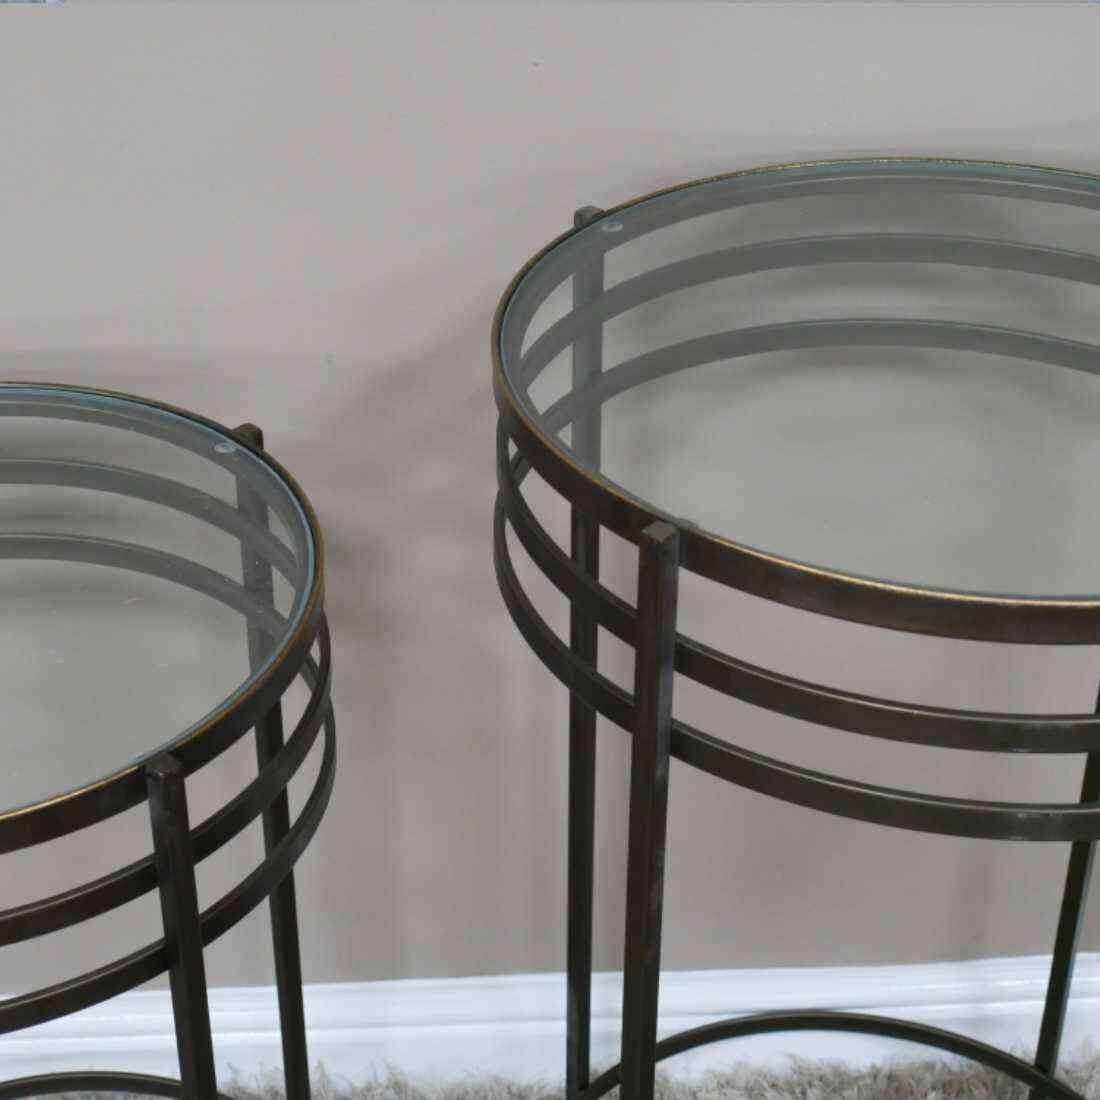 Burnished Bronzed Round Industrial Table Set - The Farthing